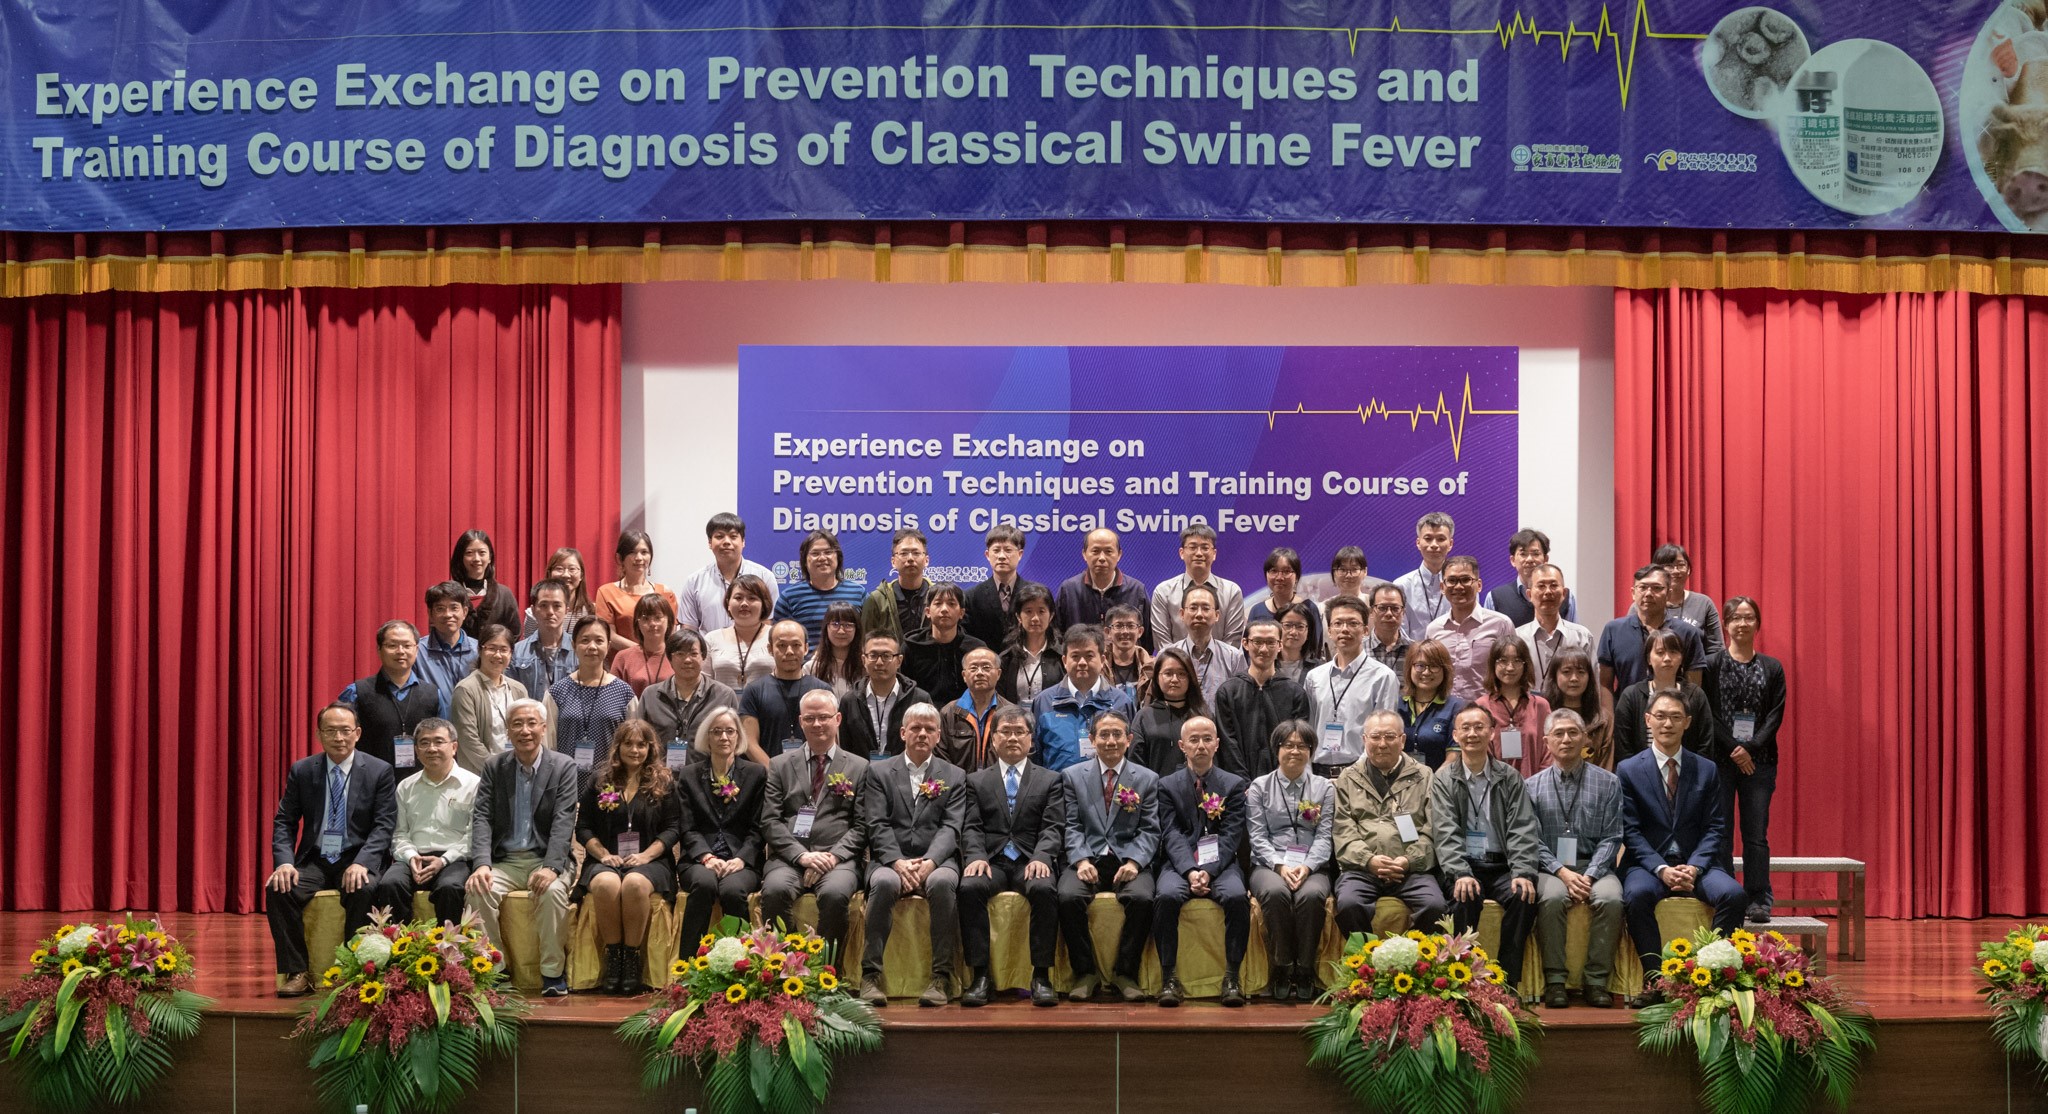 Group photo of 「Experience Exchange on Prevention Techniques and Training Course of Diagnosis of Classical Swine Fever」